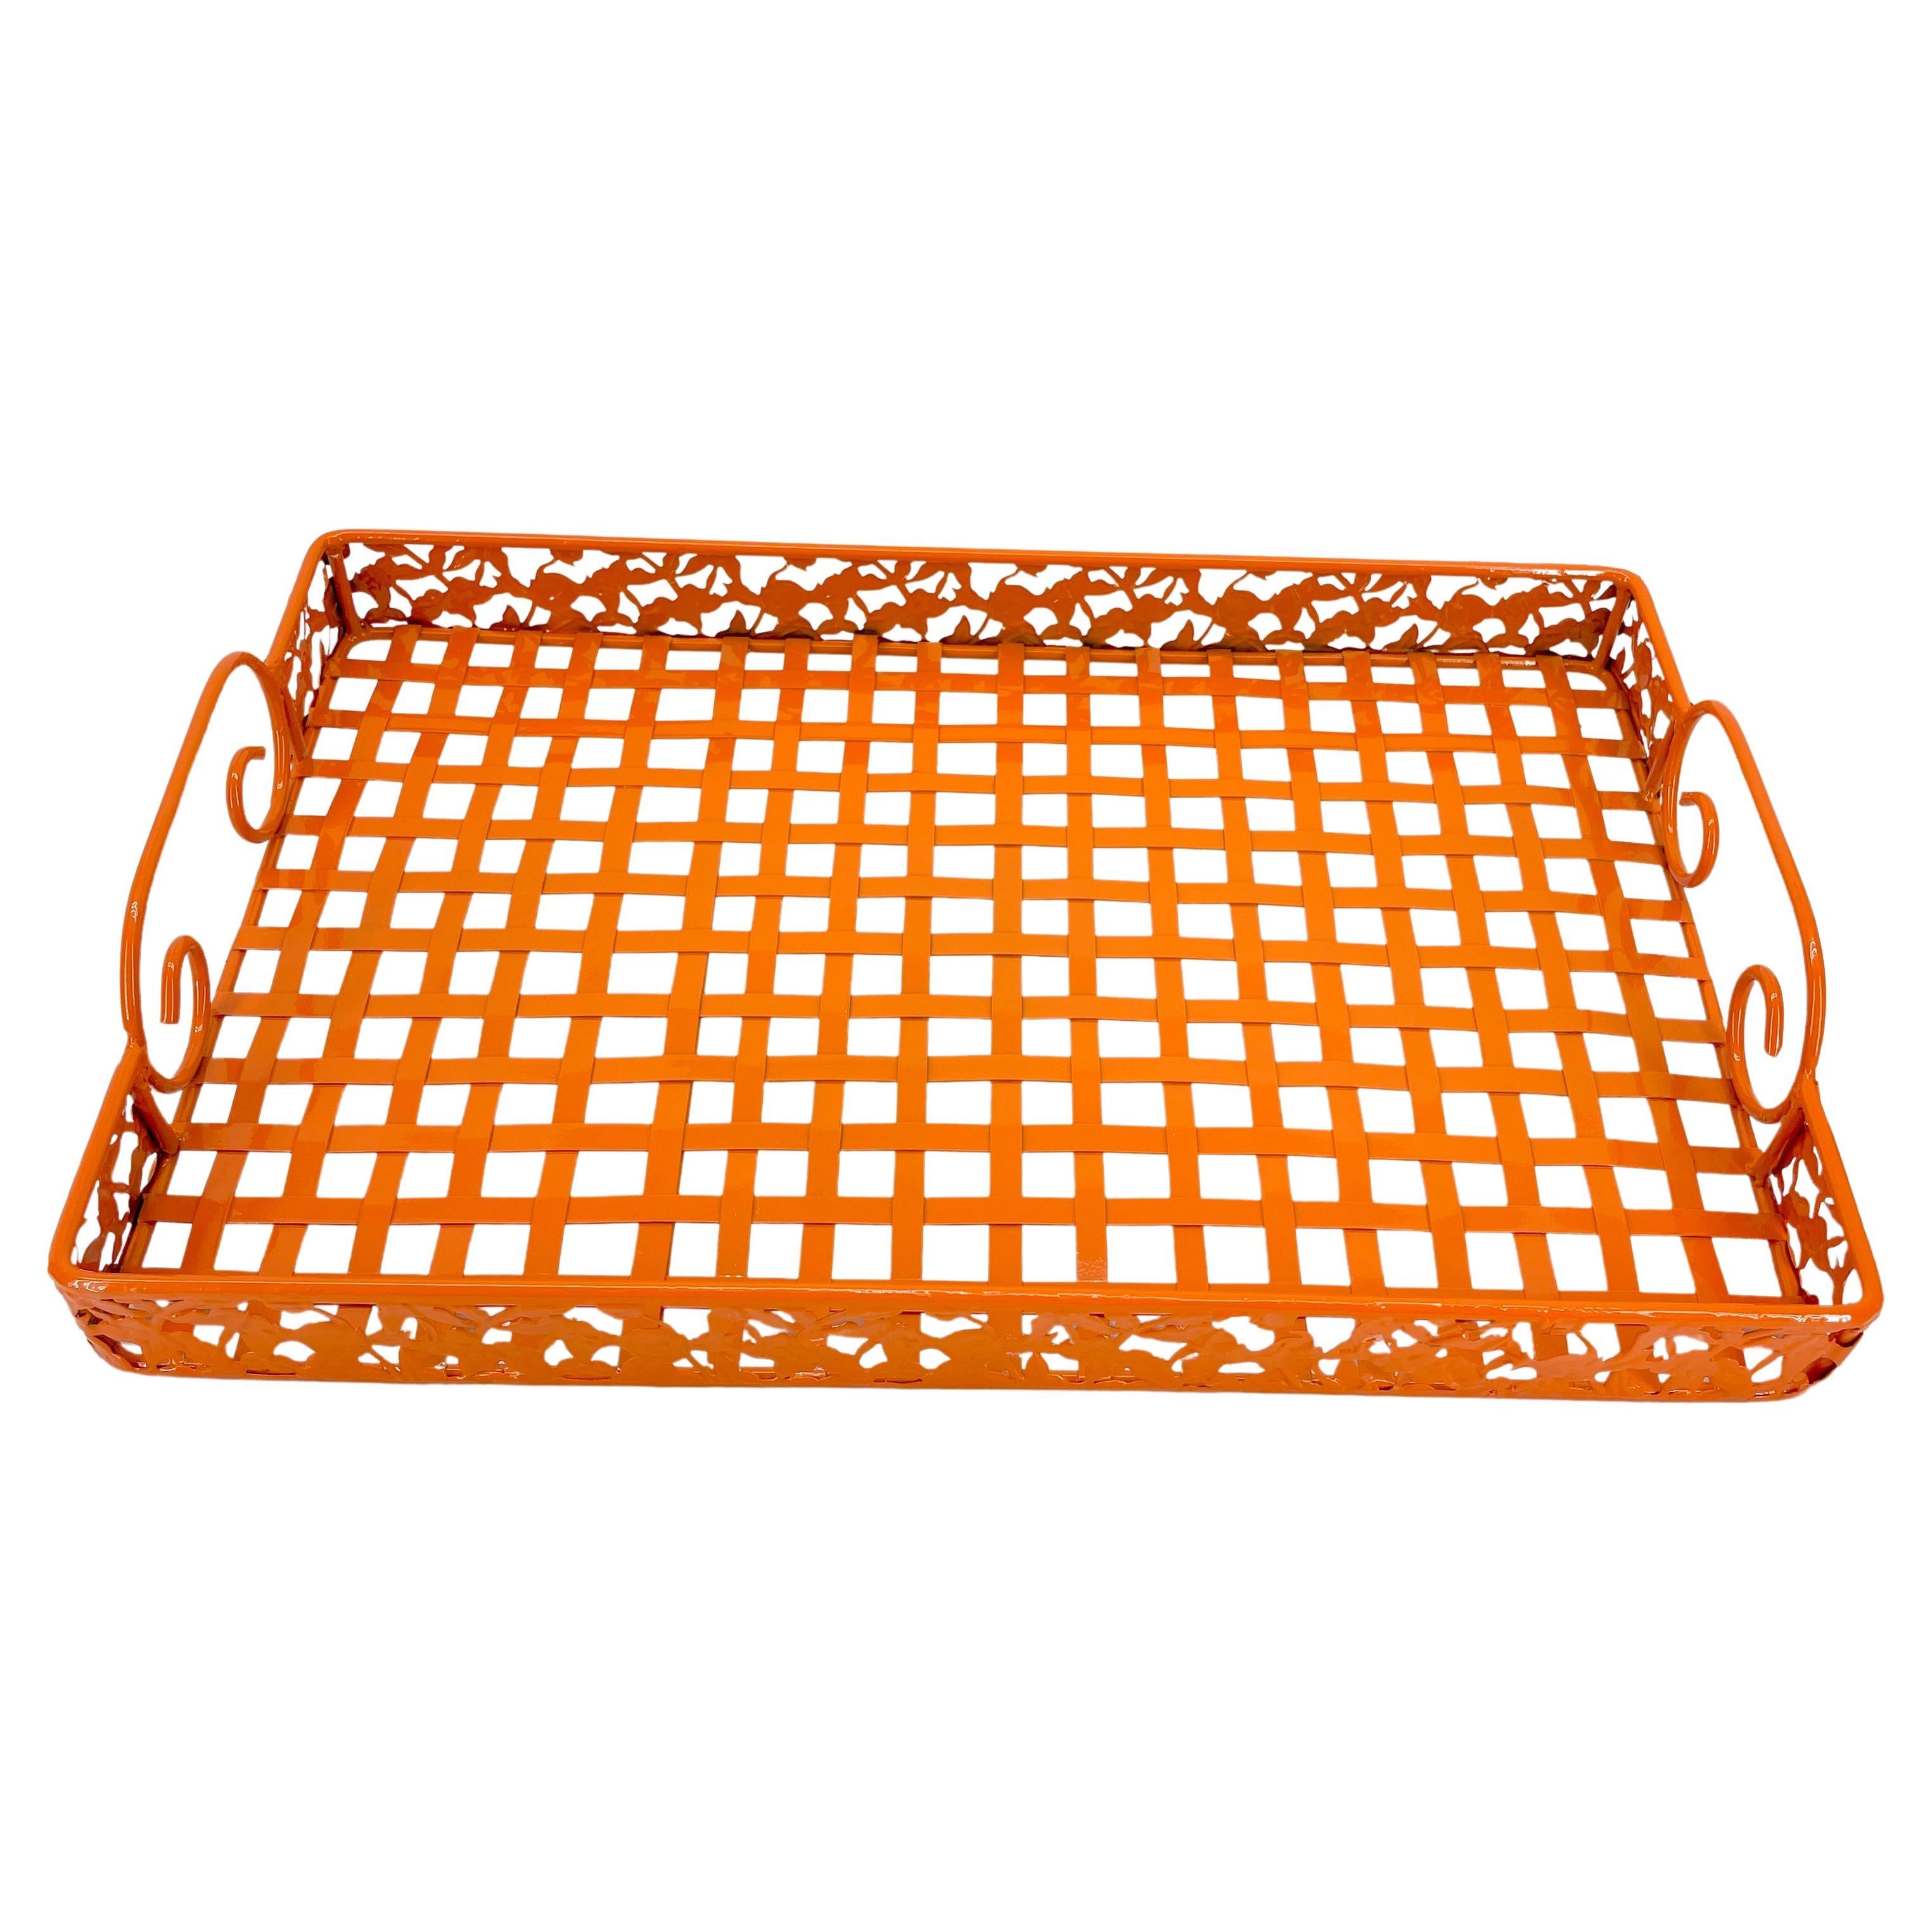 Large MCM Orange Metal Serving Bar Tray with Handles

This large and very sturdy Hermes color orange tray is a perfect addition to a bar or as a serving piece for all your entertaining needs. The newly powdered coated piece could also be displayed